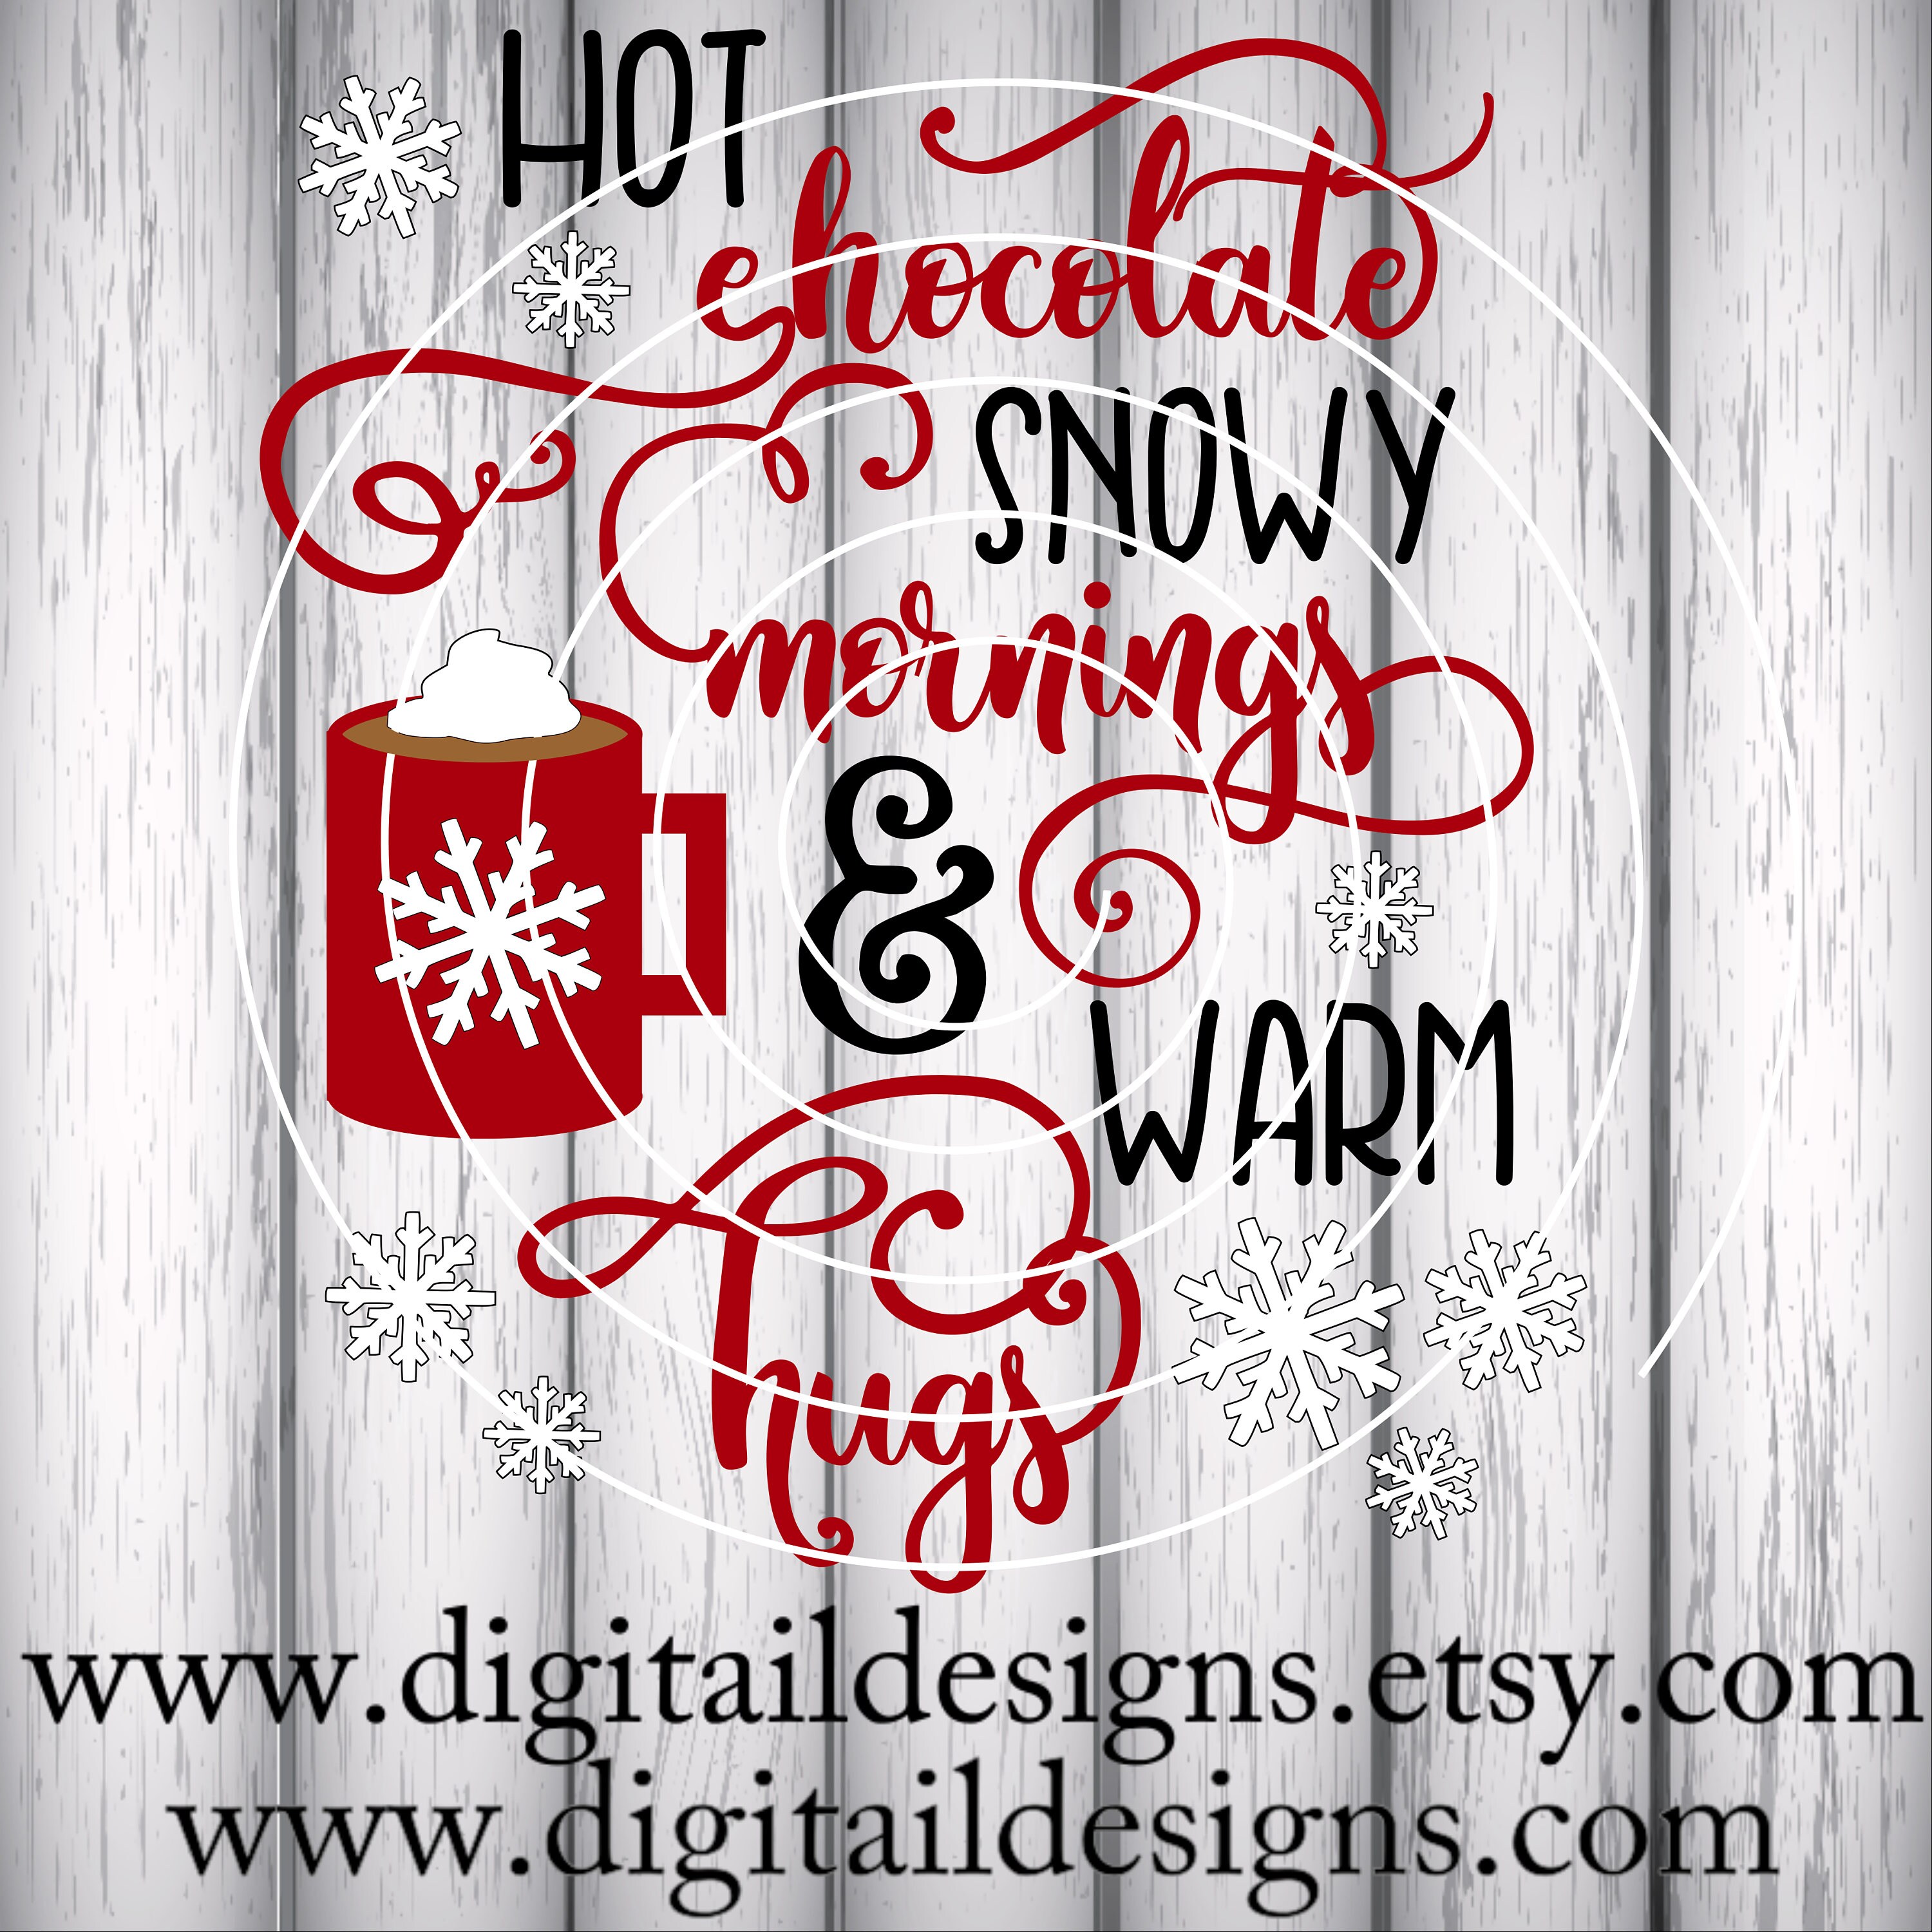 Download Hot Chocolate SVG Snowy Mornings SVG Warm Hugs SVG png